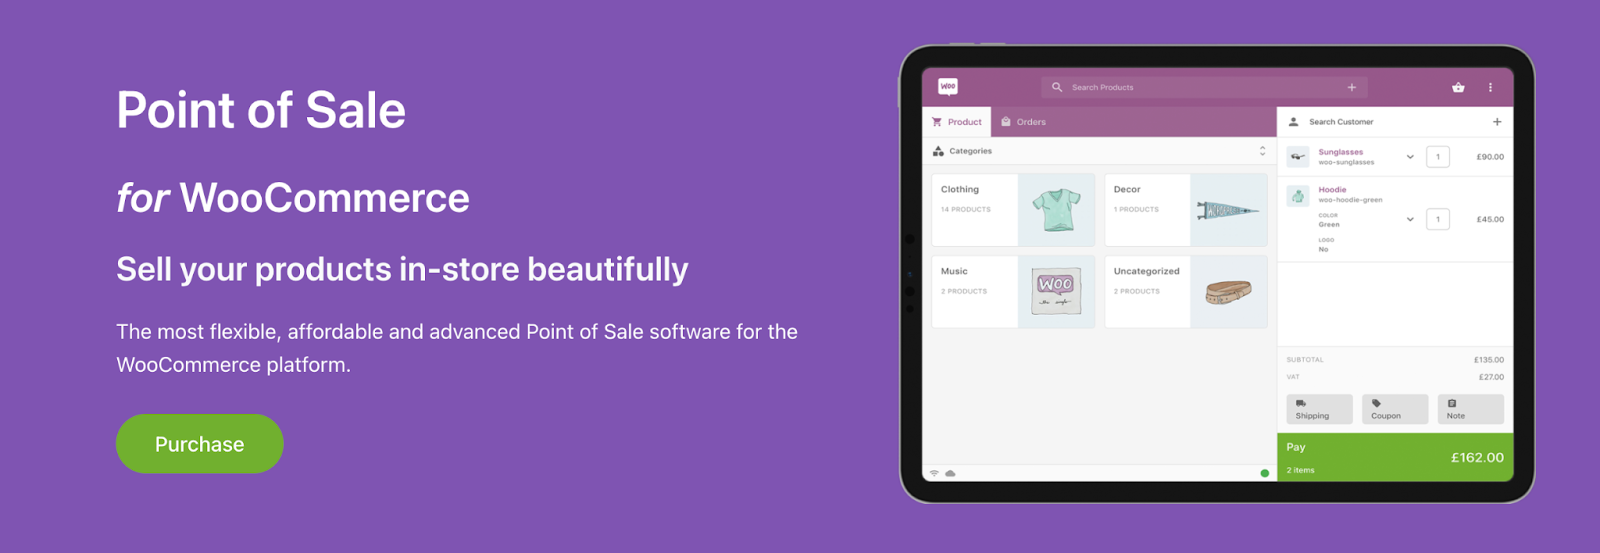 Point of Sale for WooCommerce - POS System for iPad